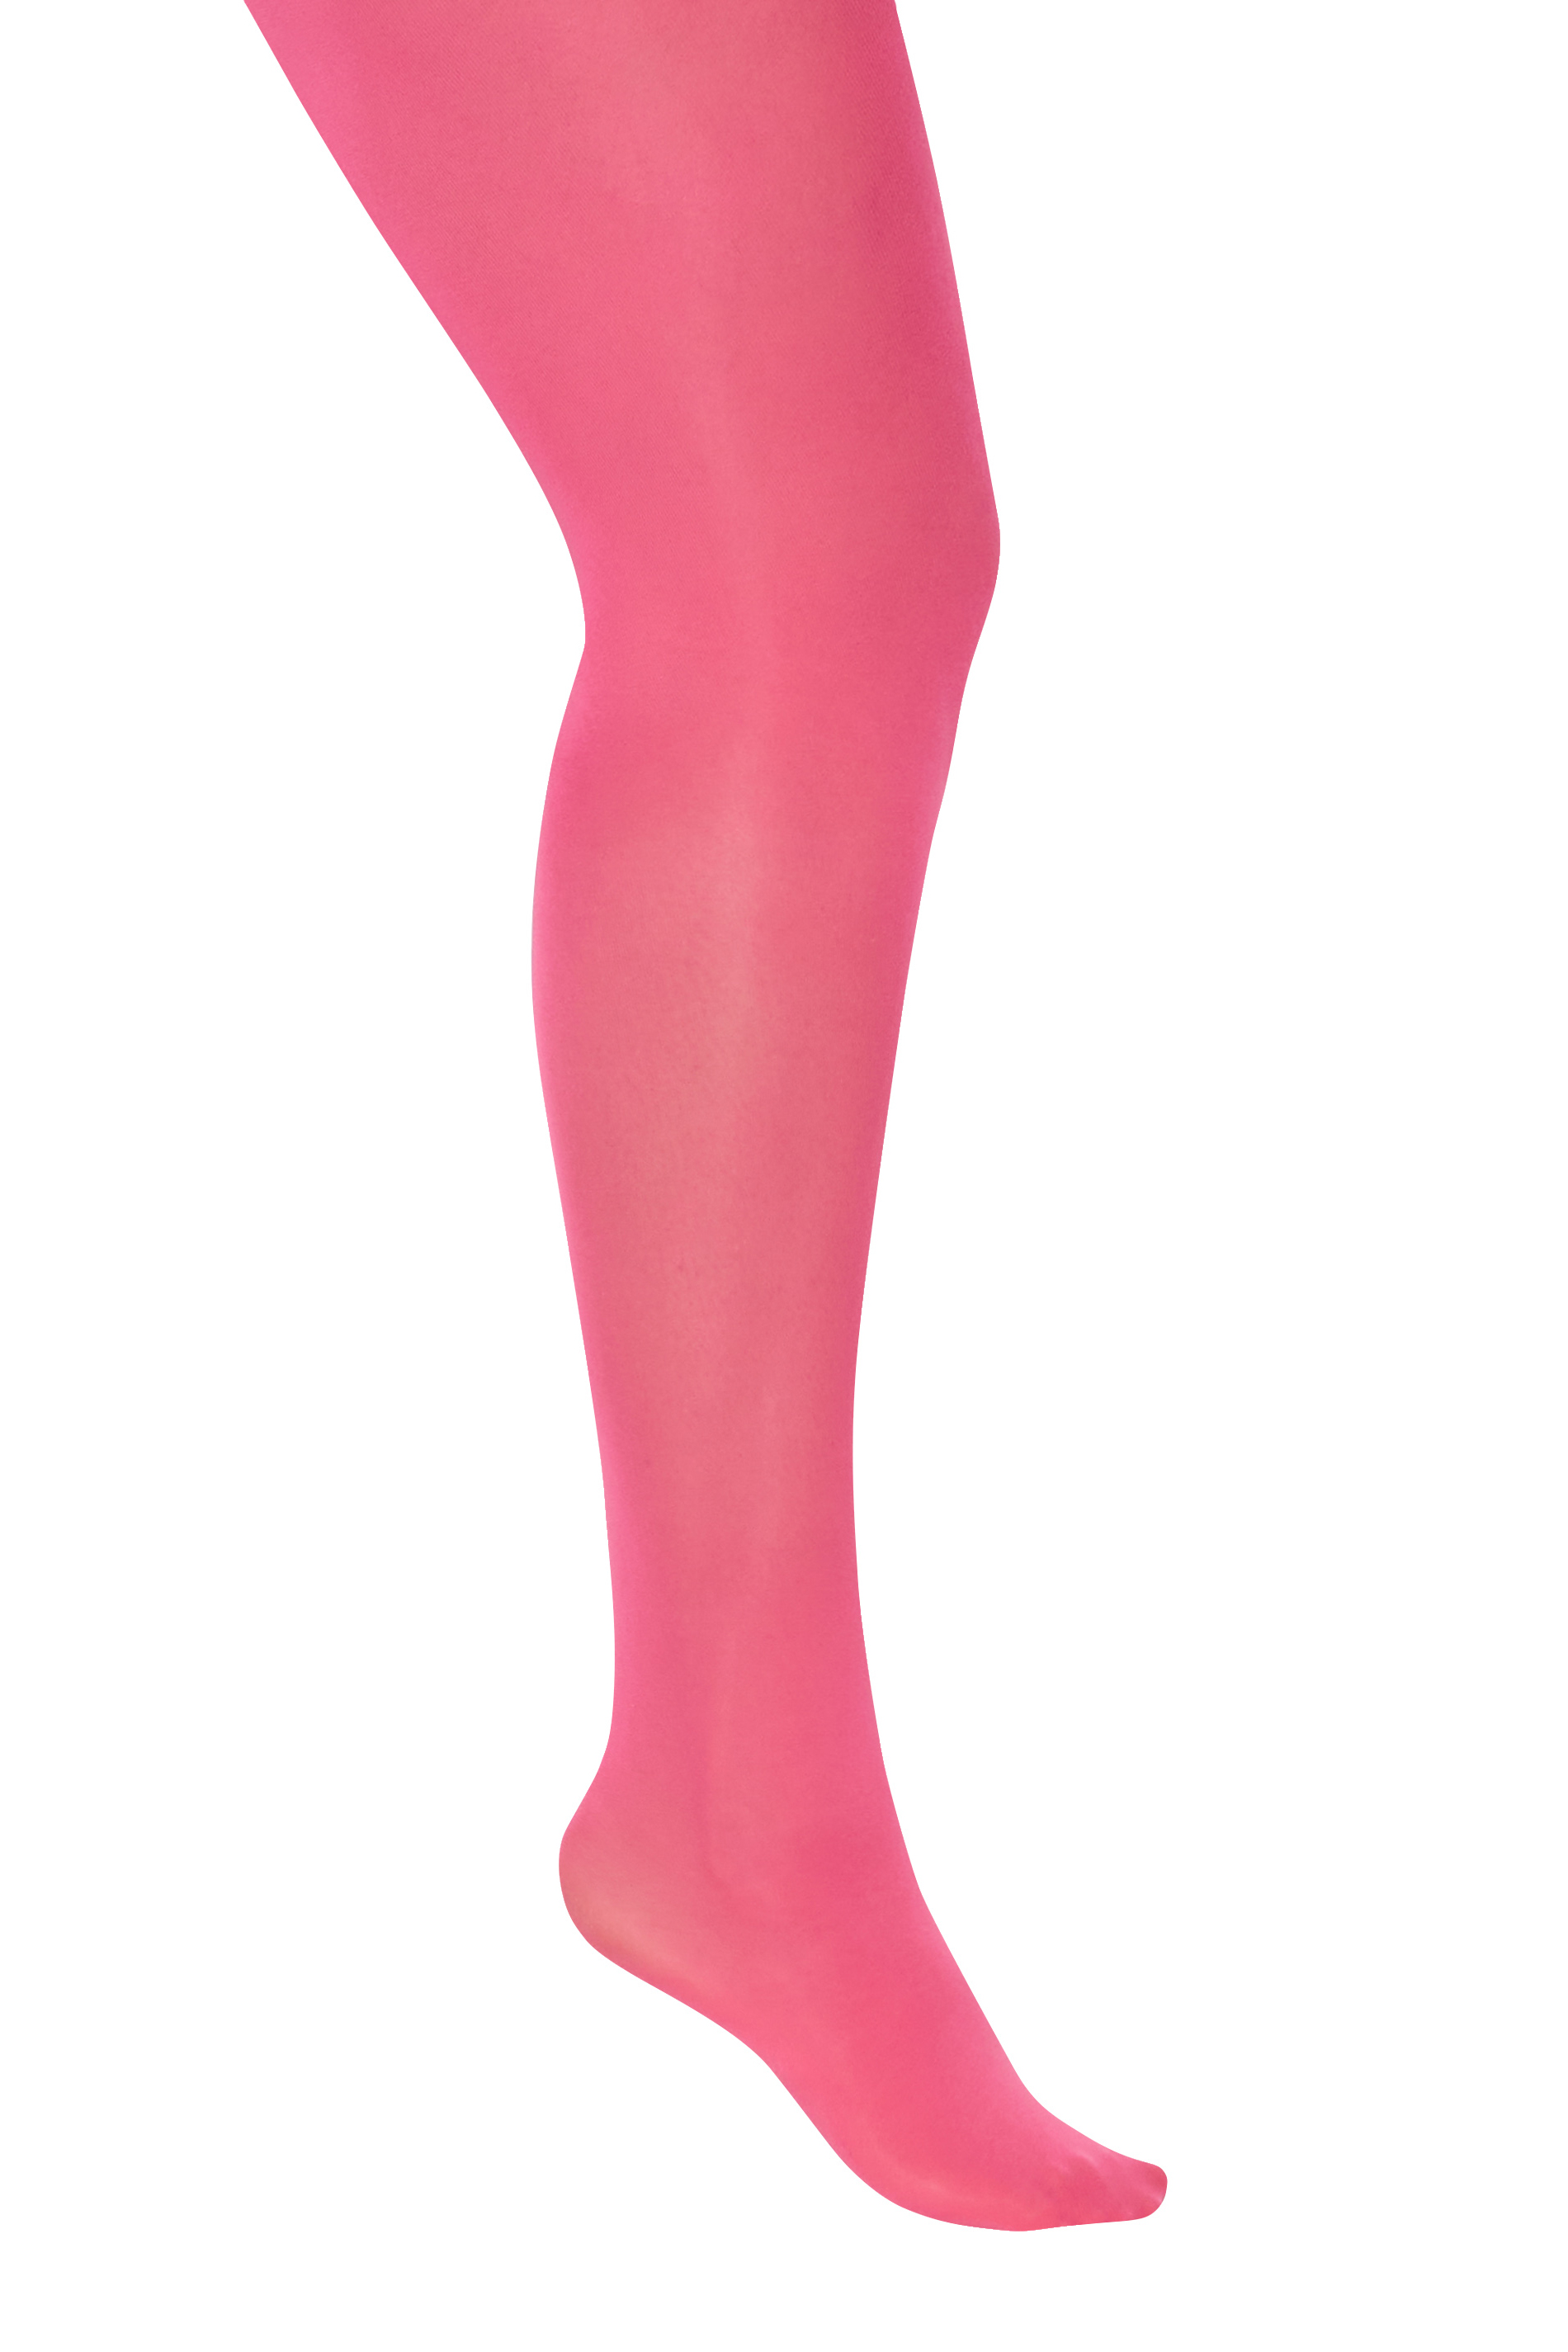 Calzitaly OPAQUE PLUS SIZE TIGHTS - 60 DEN - Tights - pink